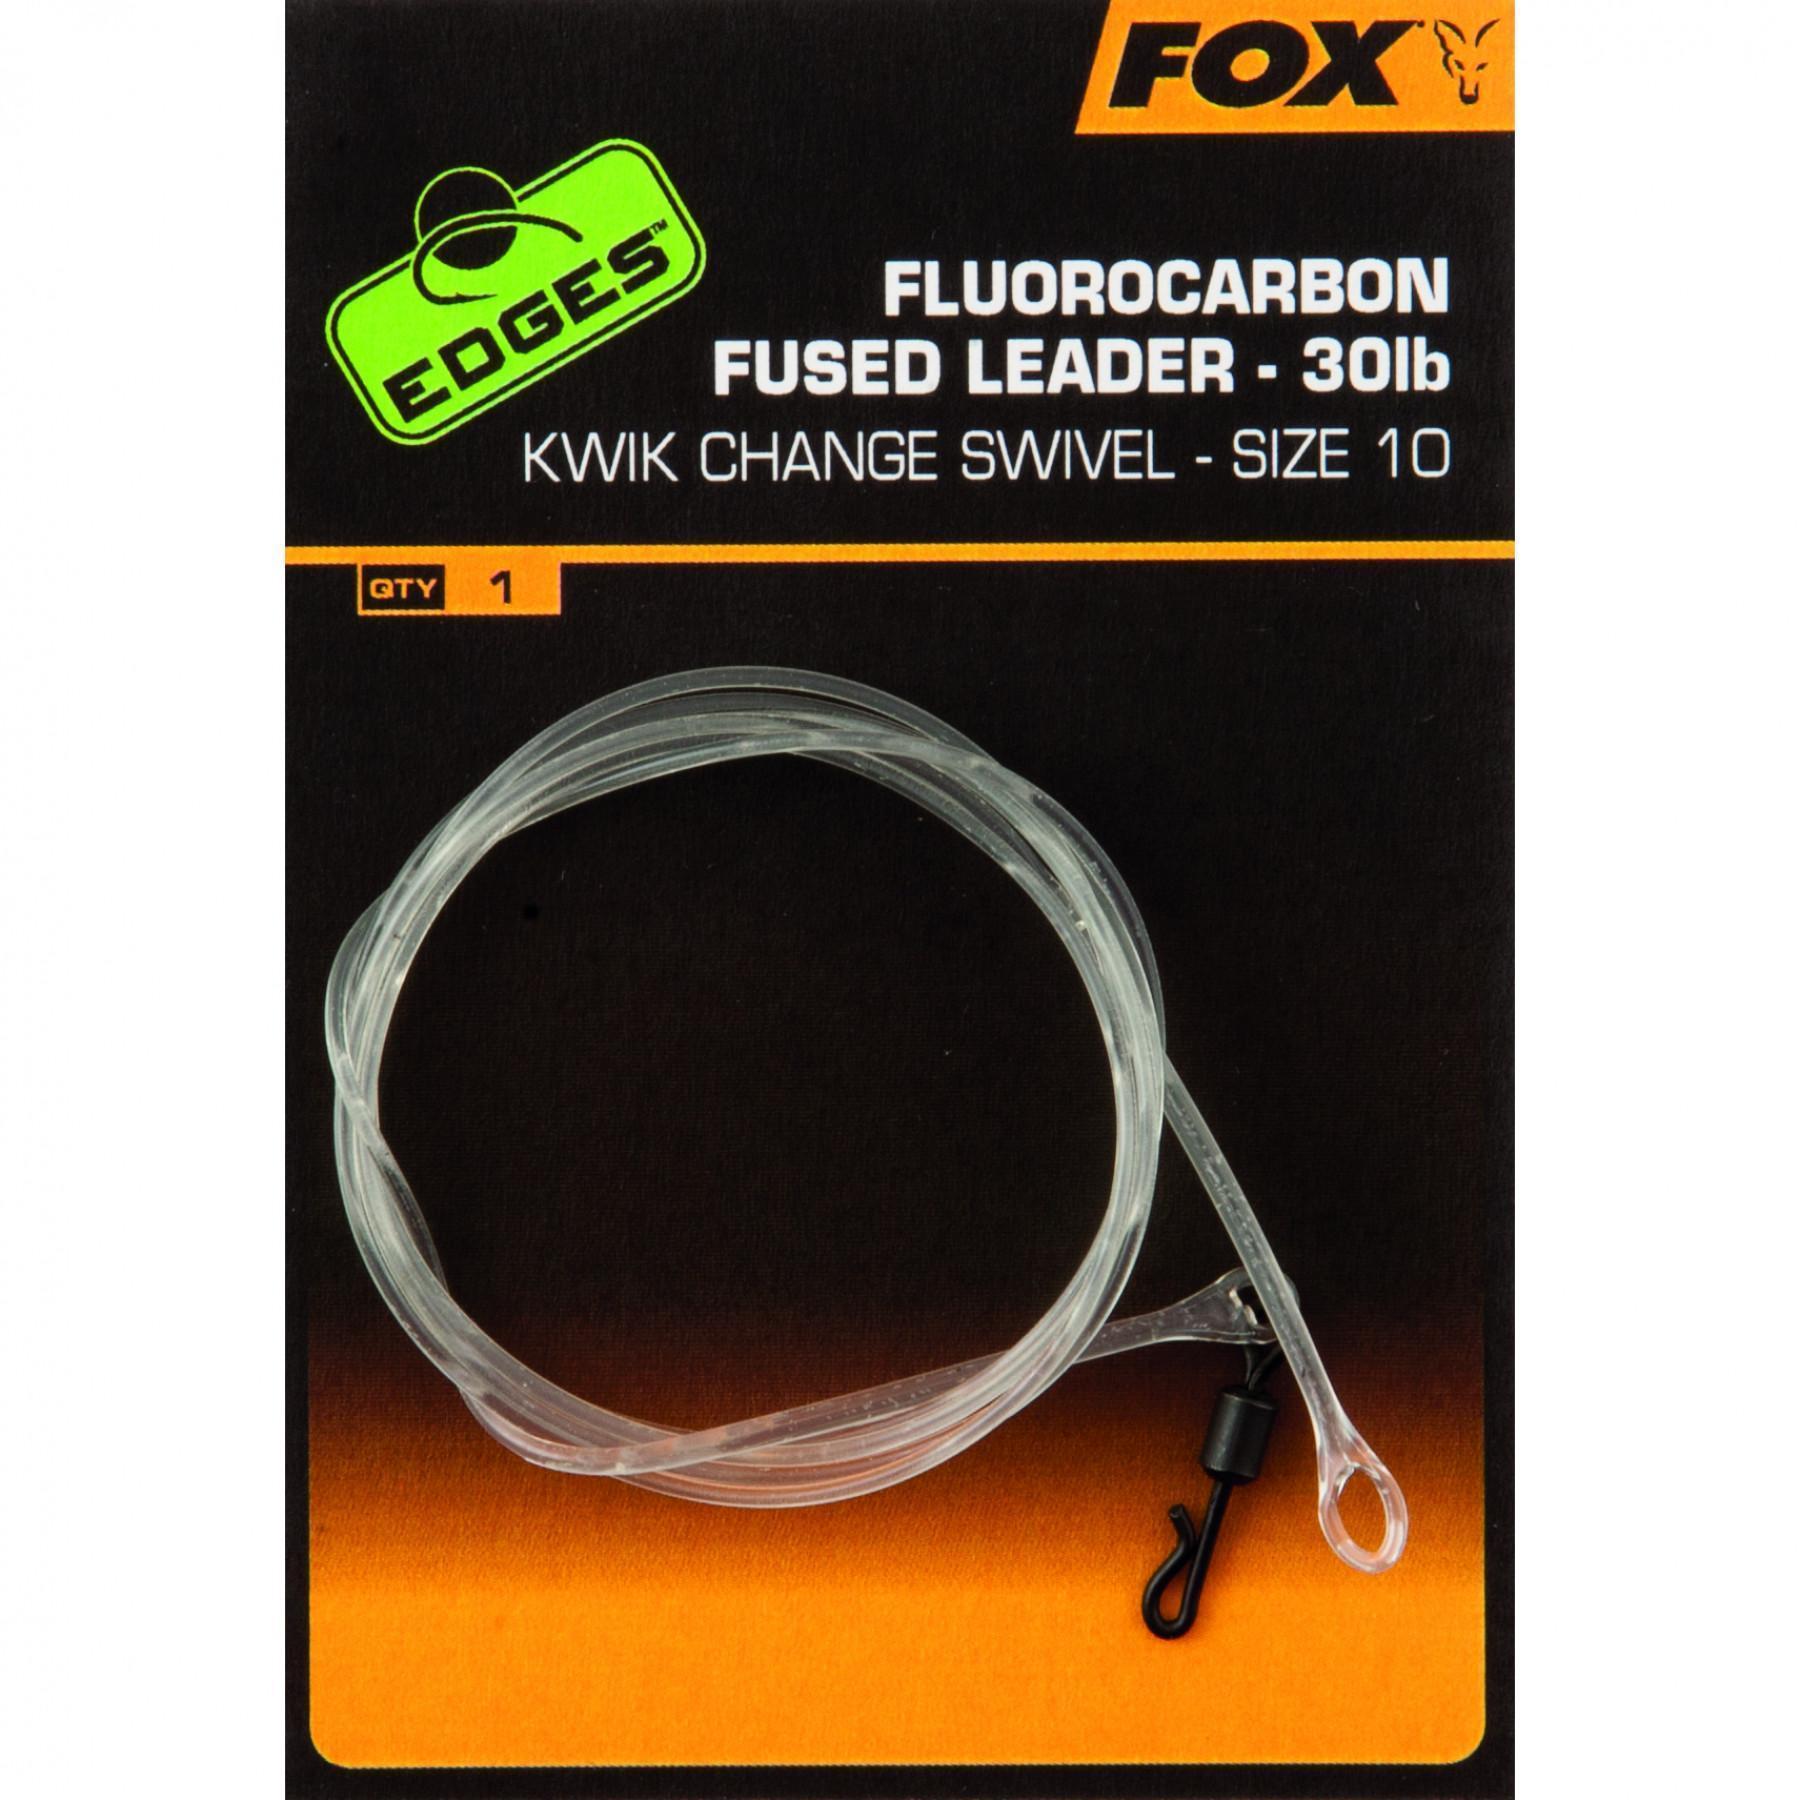 Fluorocarbon wire Fox Fused Leaders taille 10 Edges